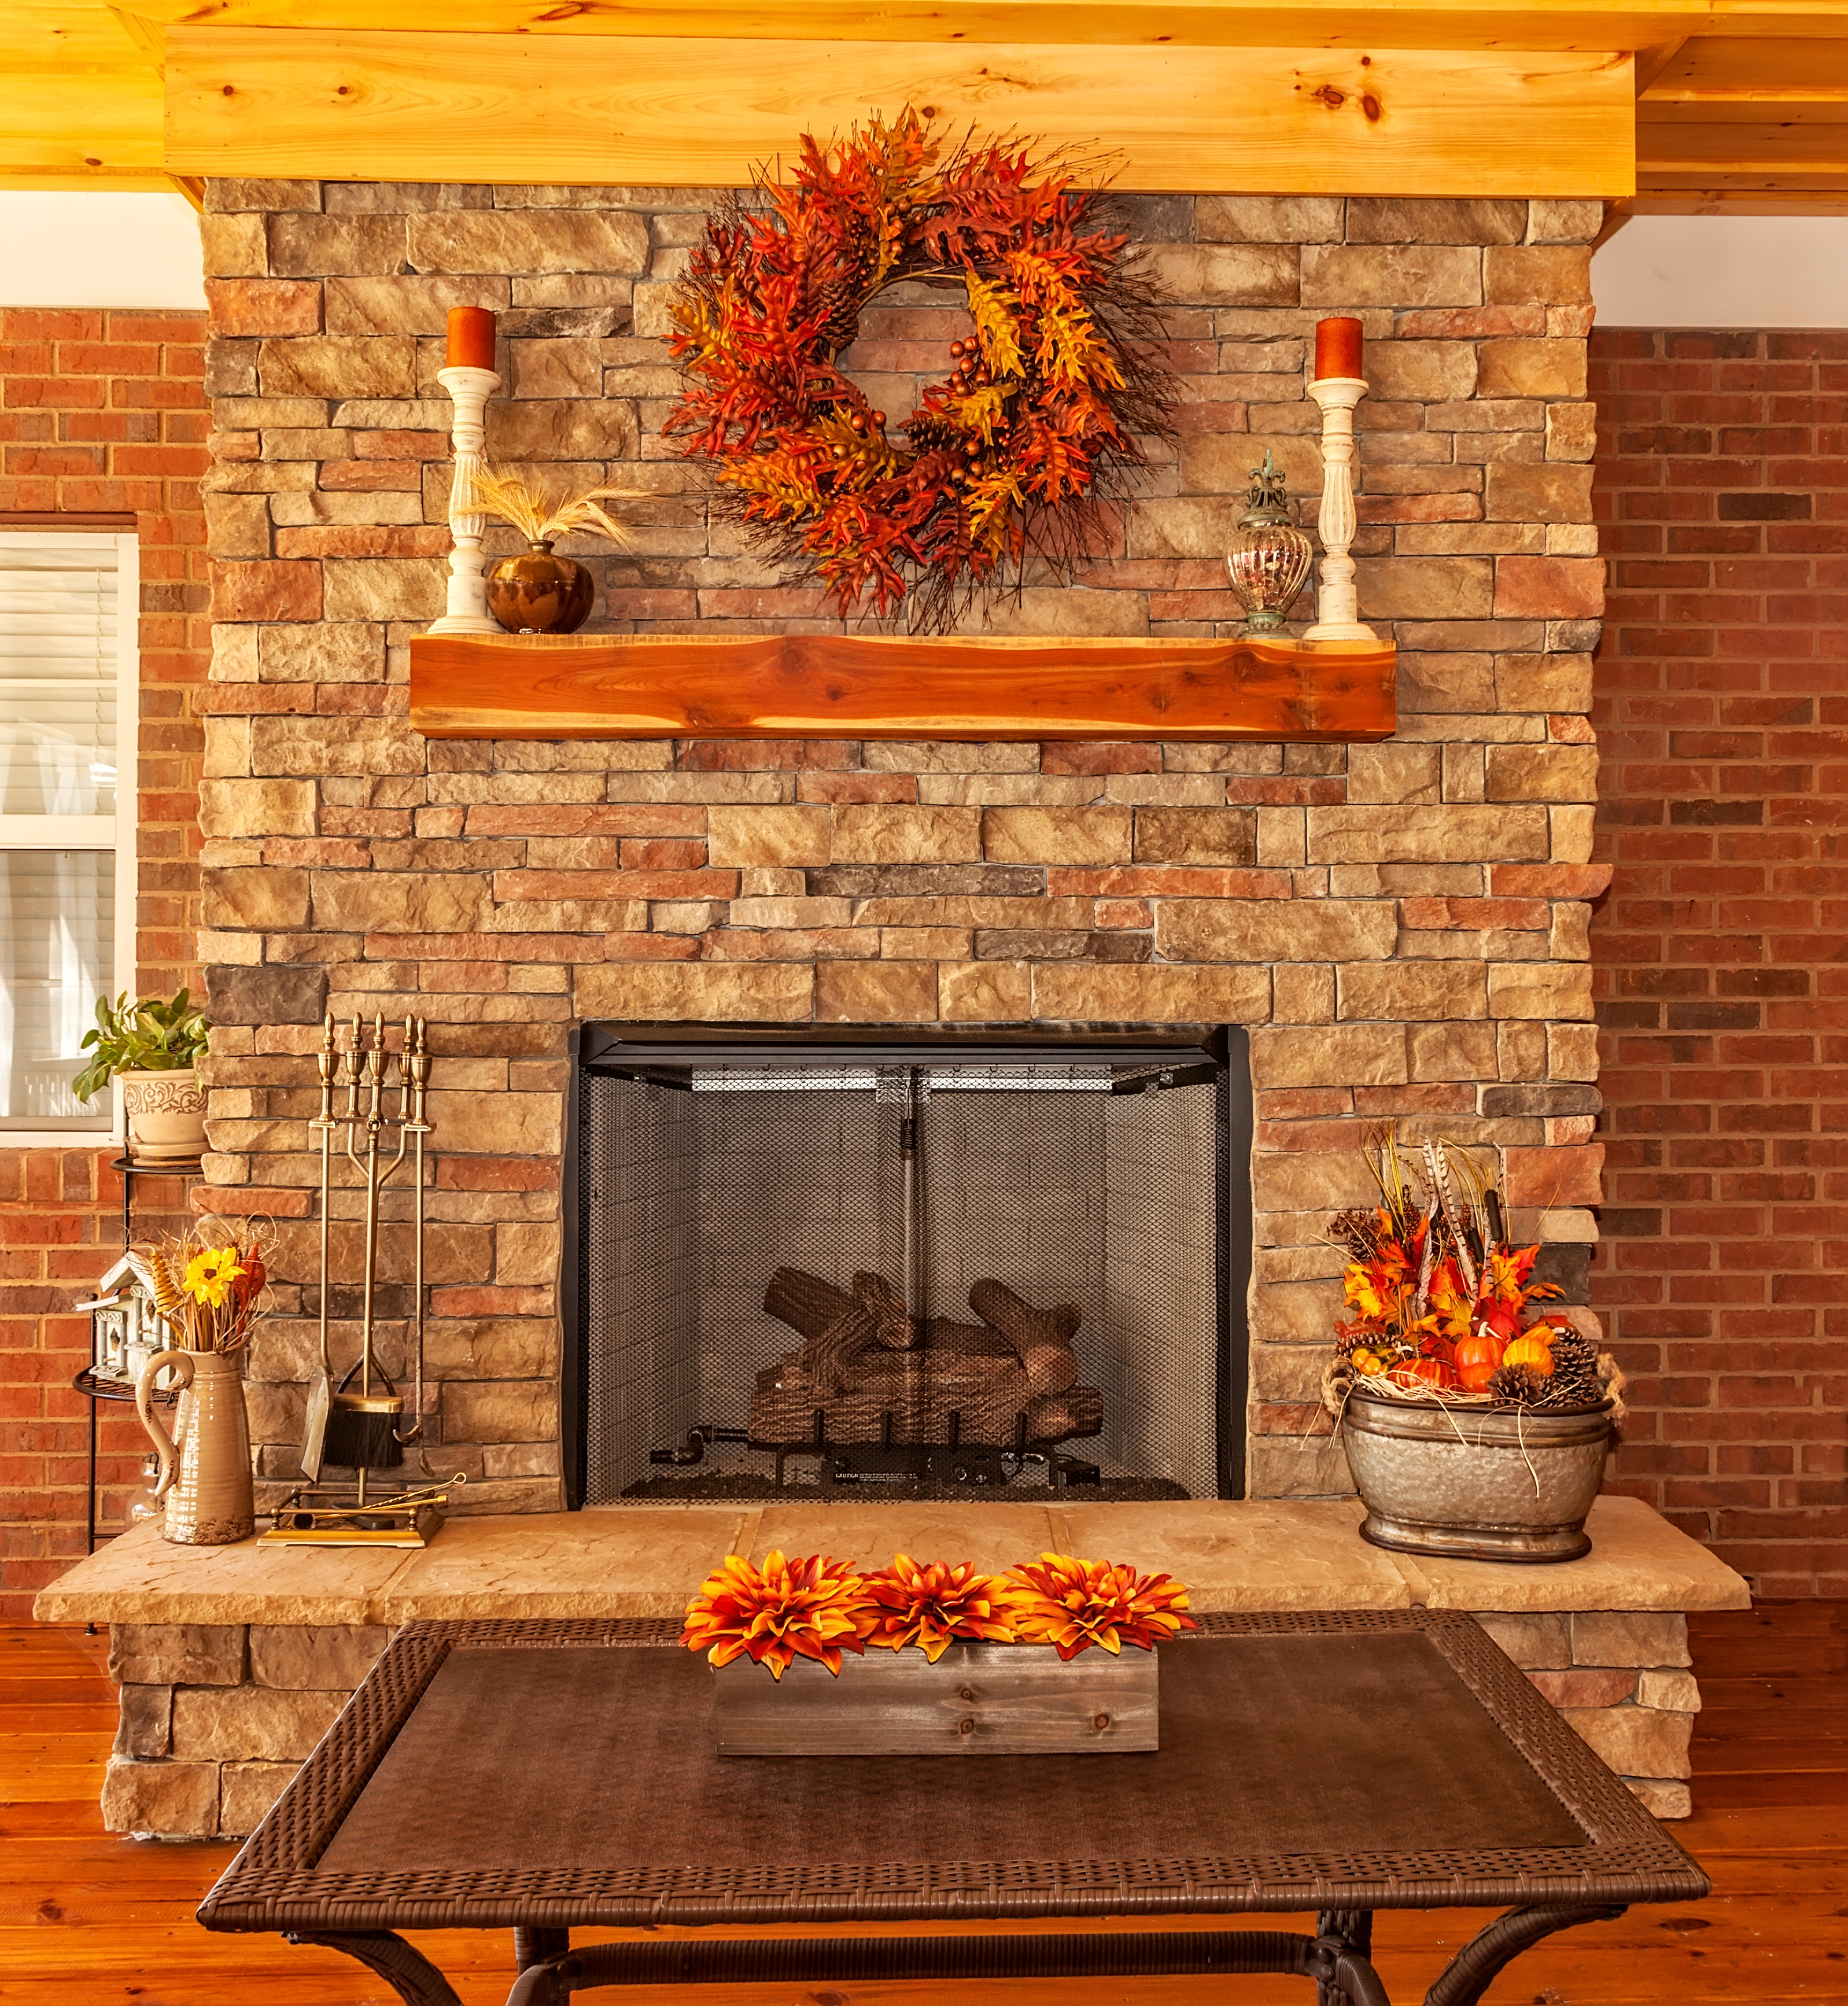 5 Fall Mantel Decorating Ideas That'll Make You Look Like a Pro 76